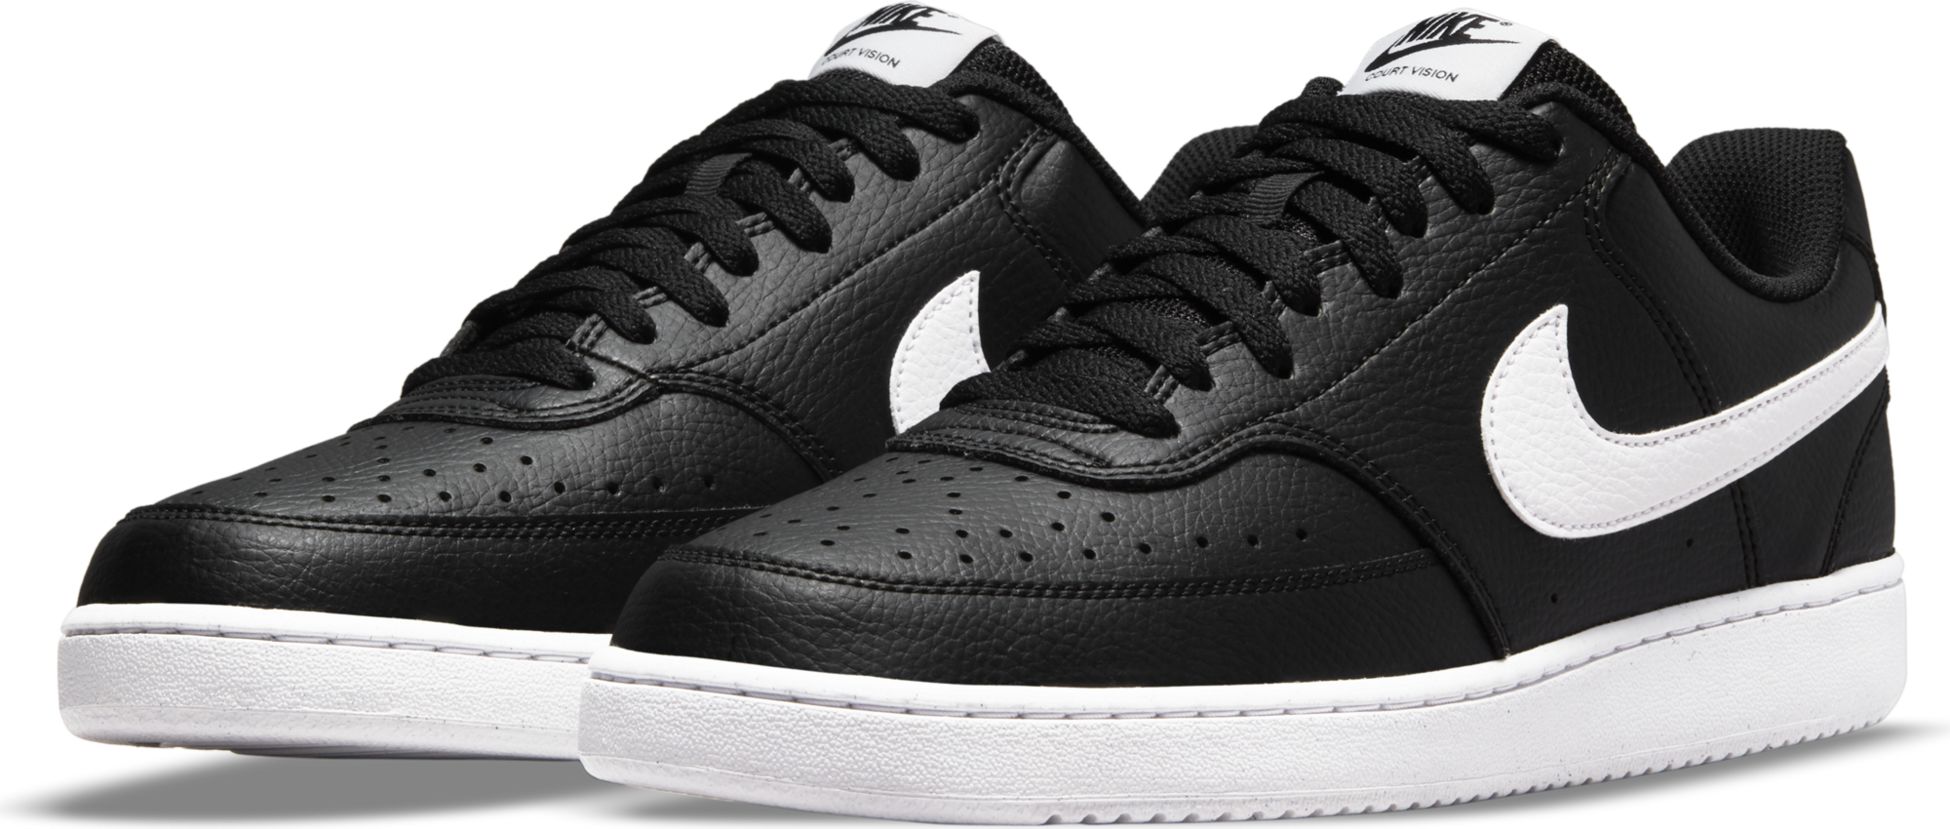 NIKE, M COURT VISION LOW